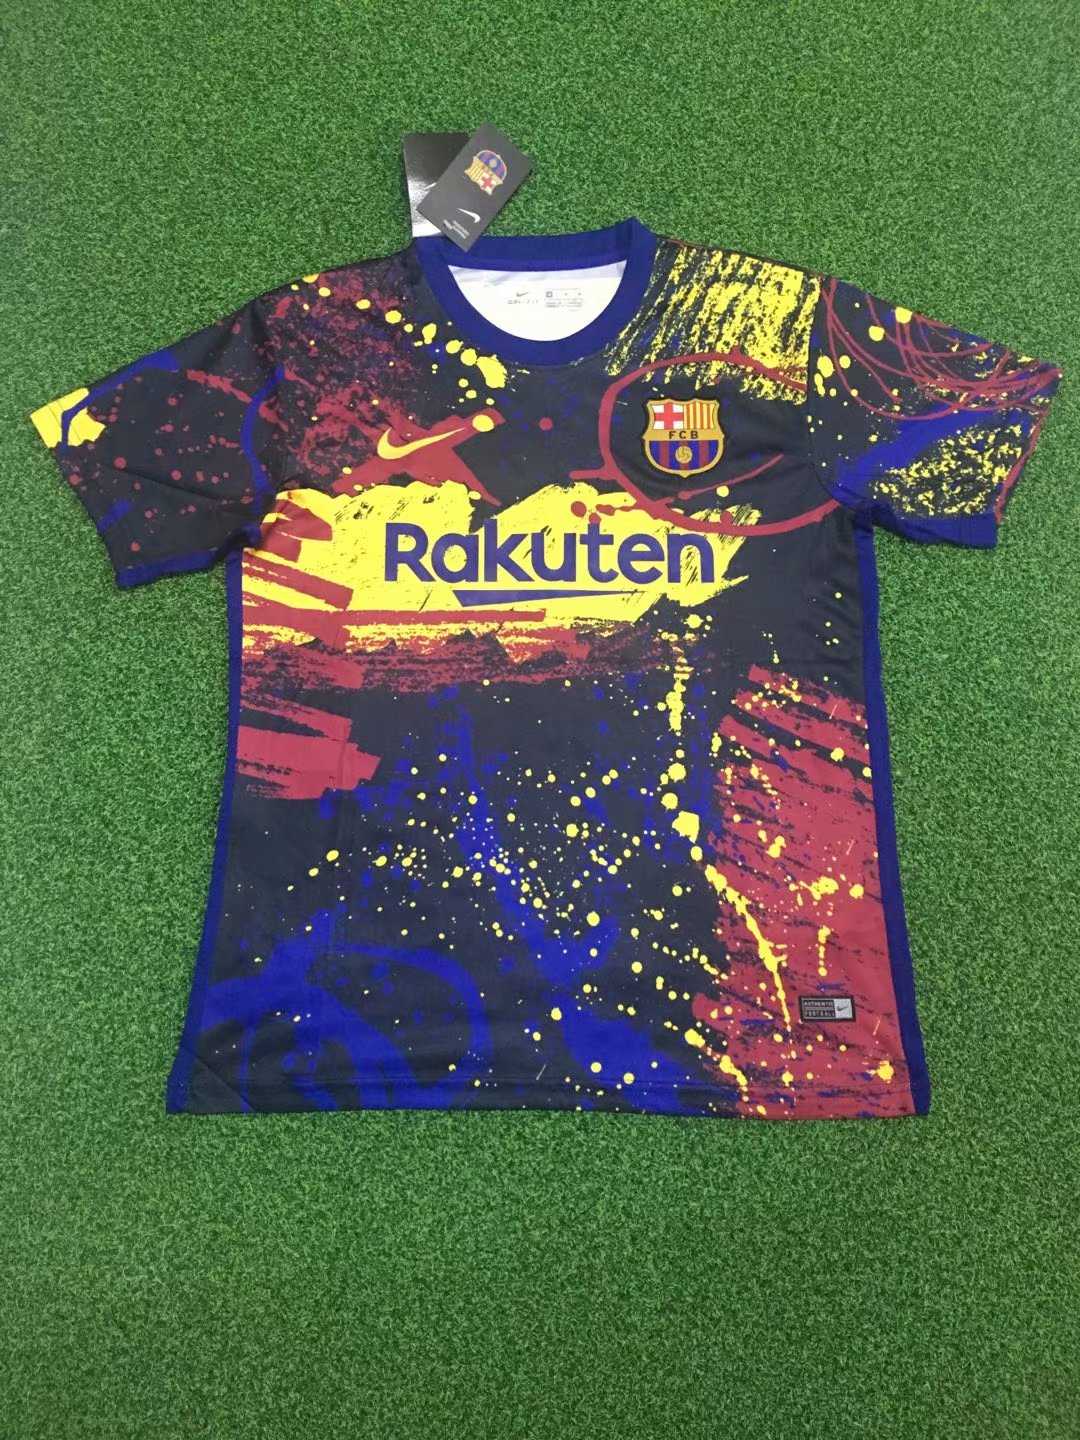 2020/21 Barcelona Camouflage Mens Soccer Traning Jersey